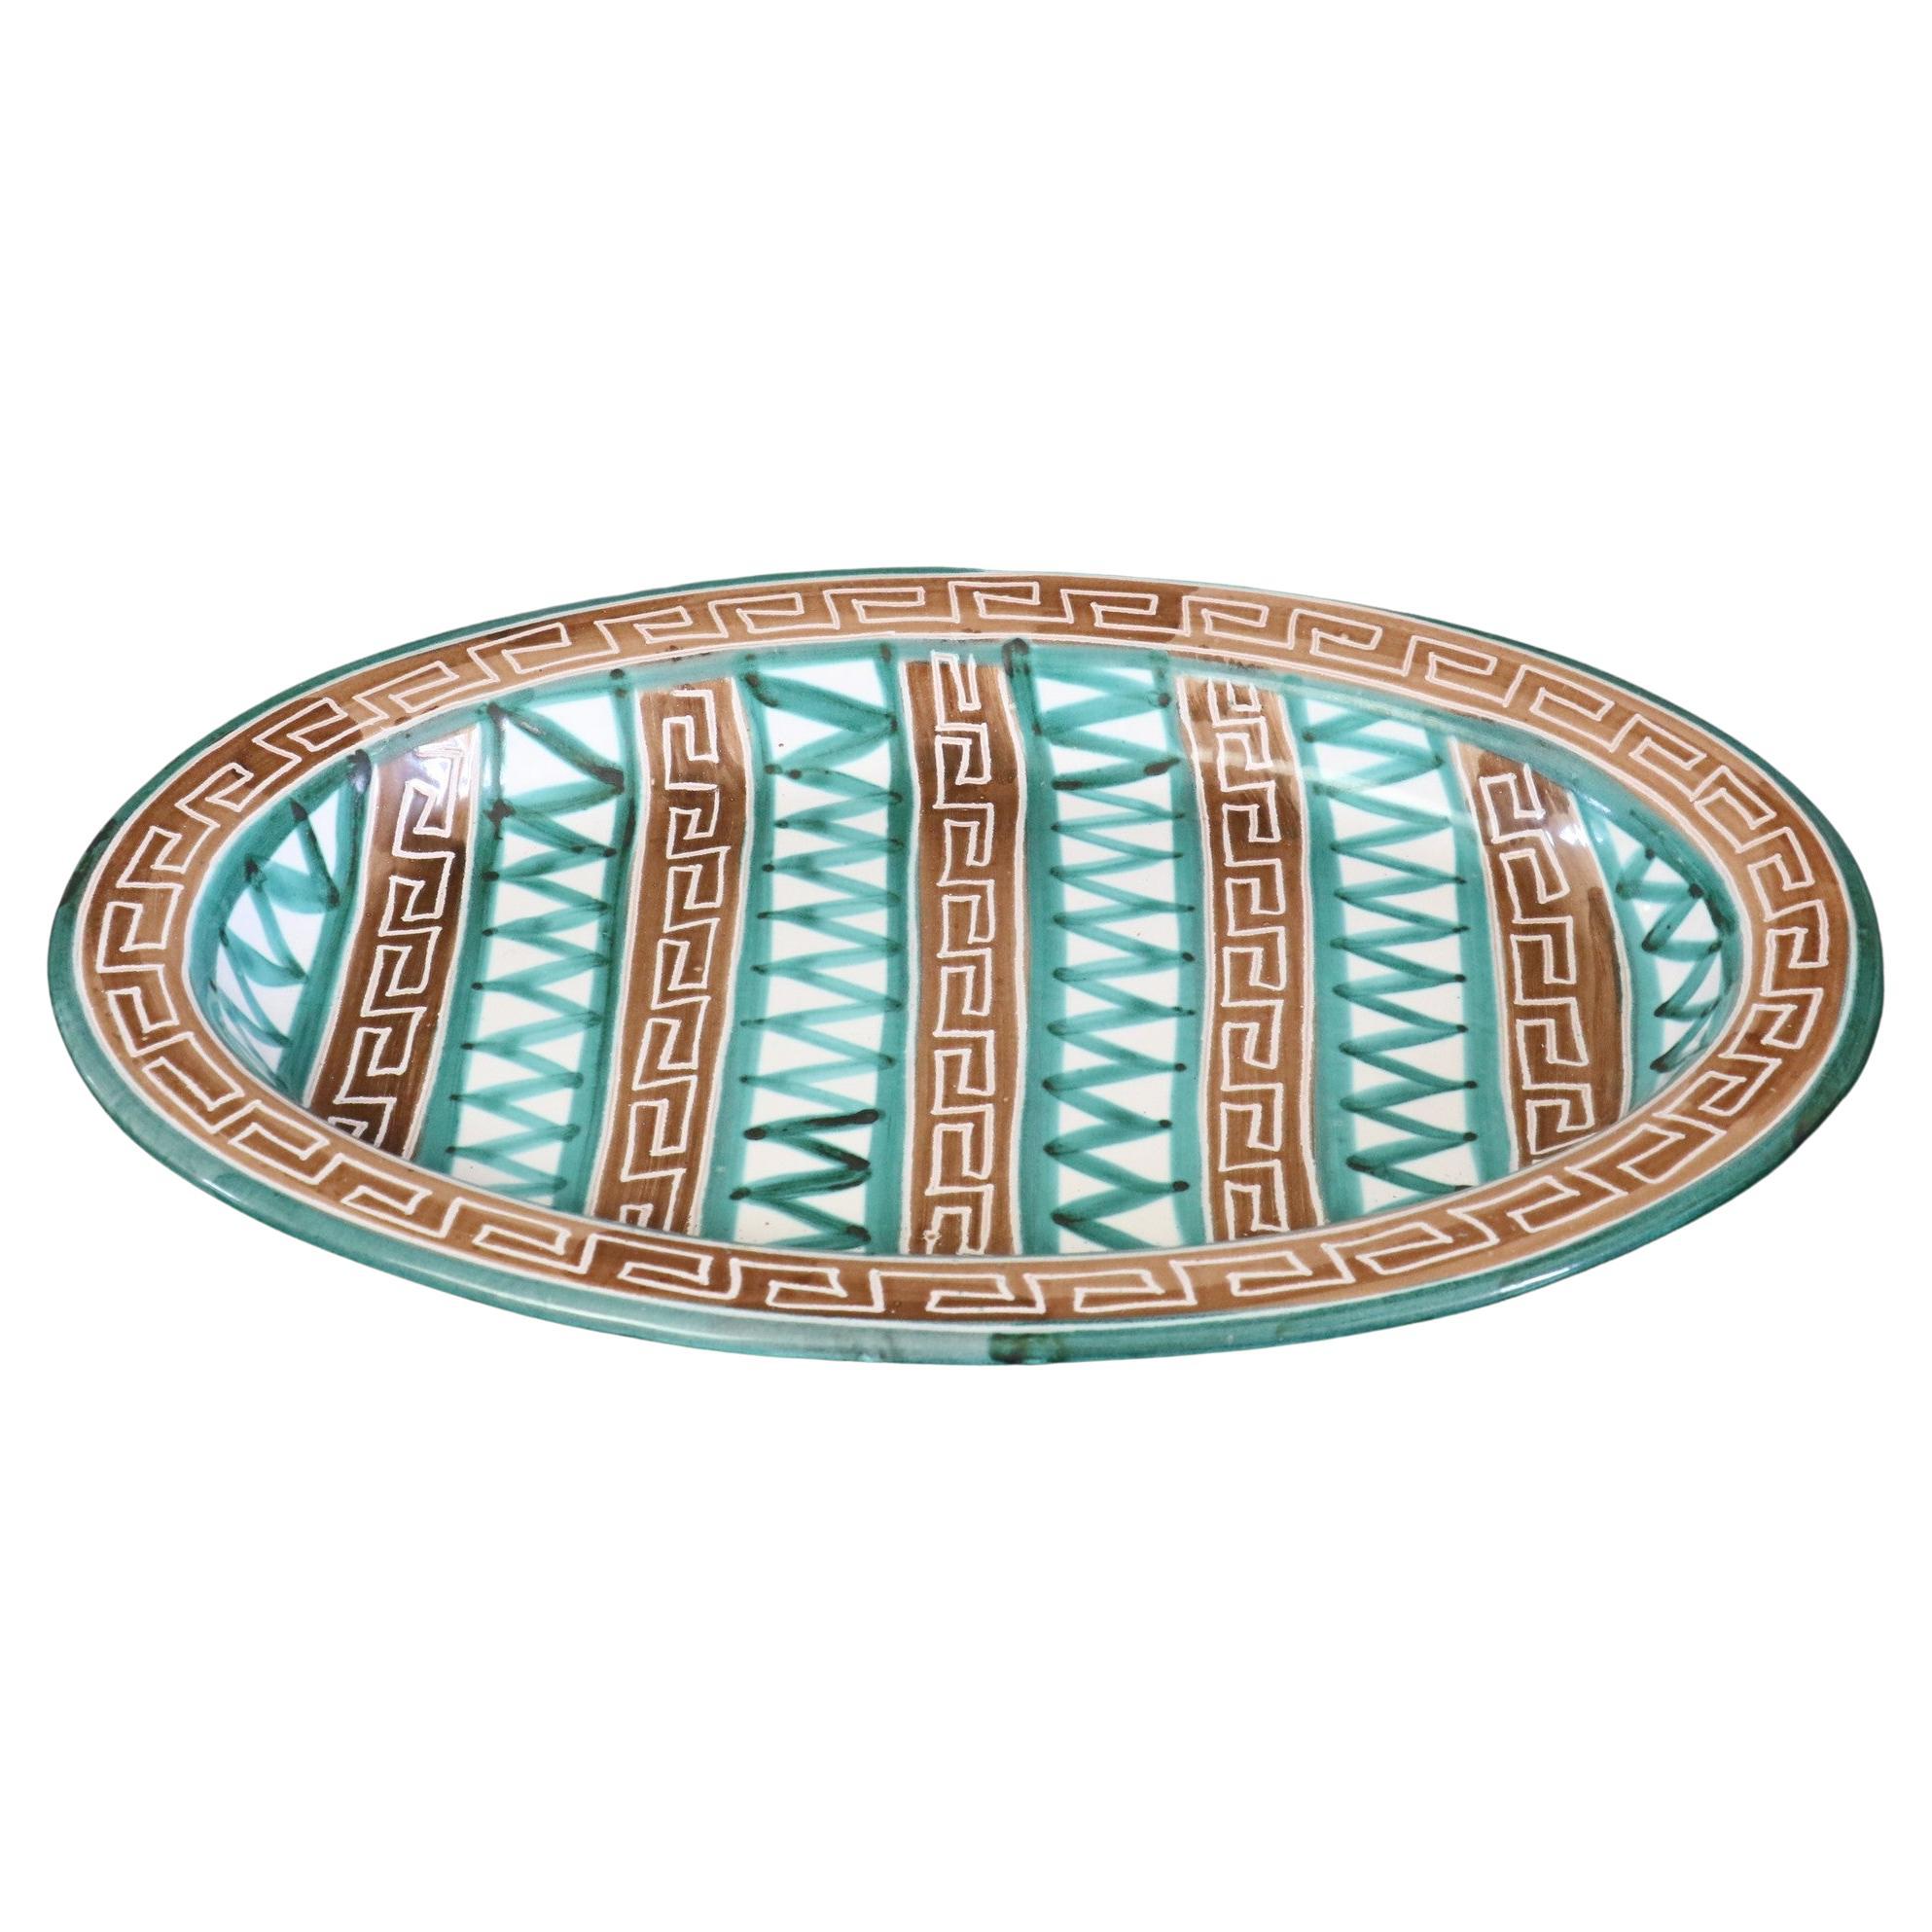 Robert Picault, Large Oval Ceramic Dish, Plate, Signed, Vallauris, France 1950s For Sale